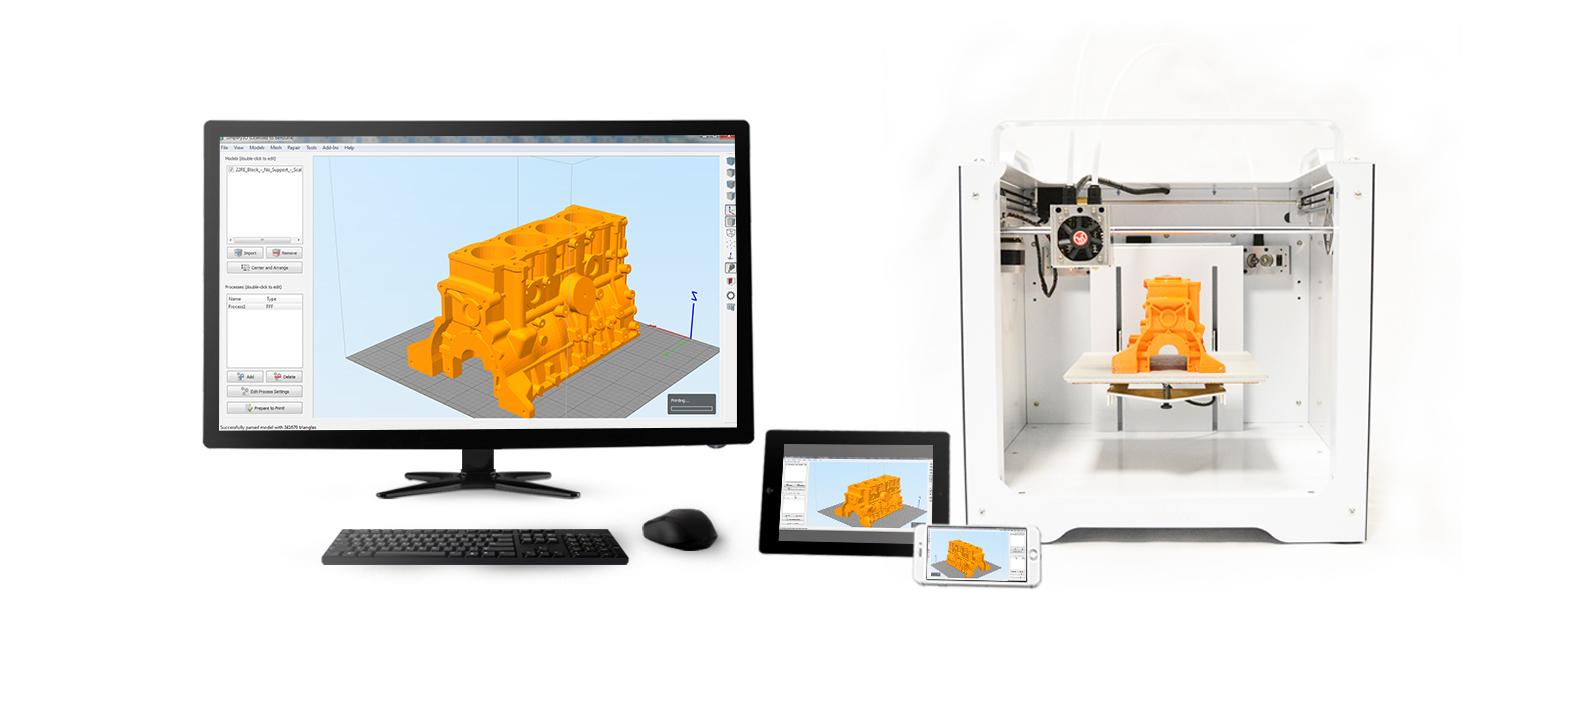 Hot glue gun becomes handheld 3D printer with some help from Lego